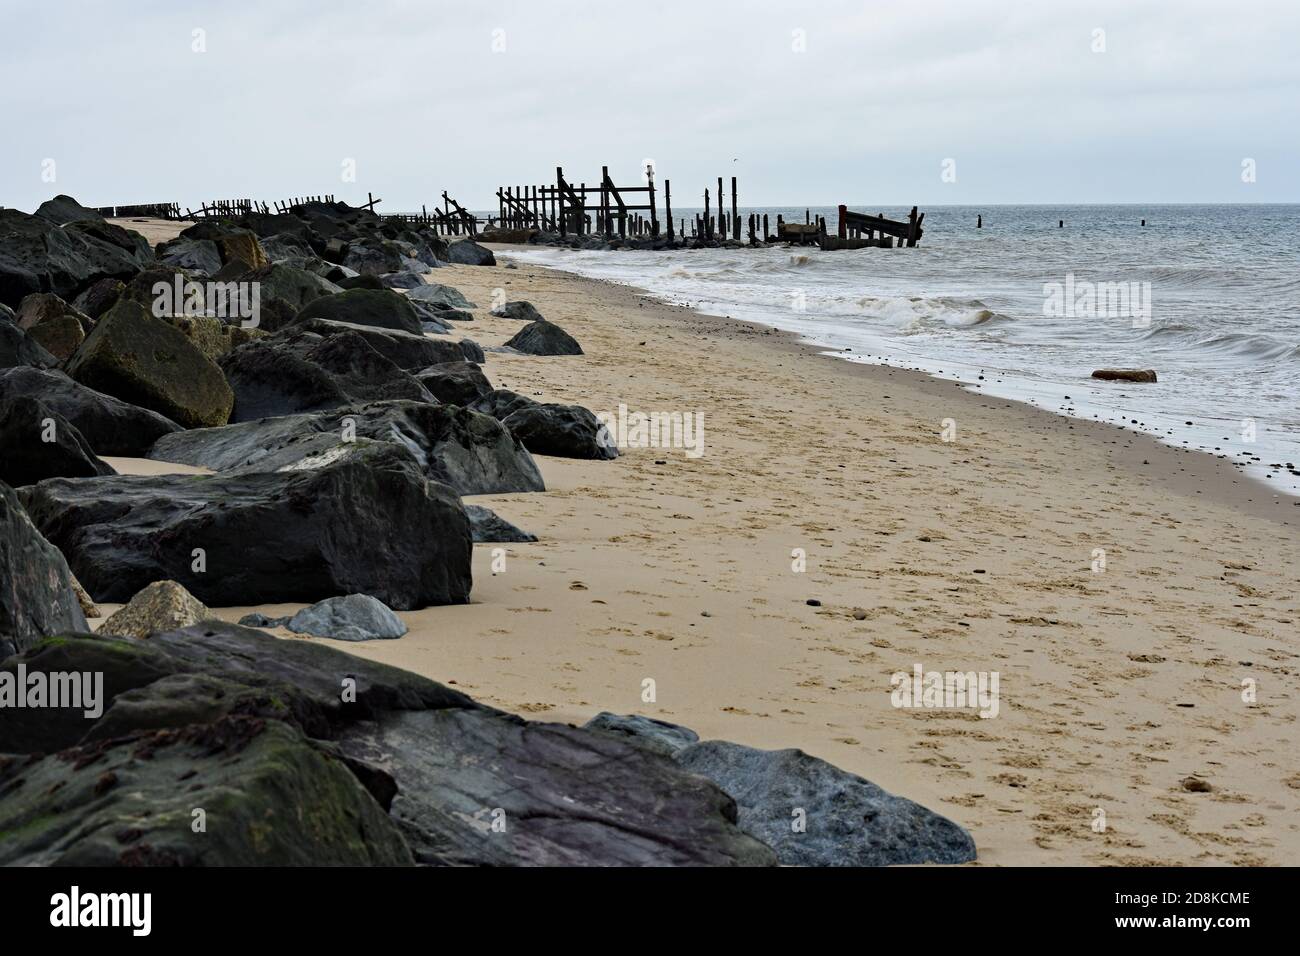 Large boulders and old wooden sea defences to prevent costal erosion of the cliffs along Happisburgh Beach, Norfolk, UK. Stock Photo